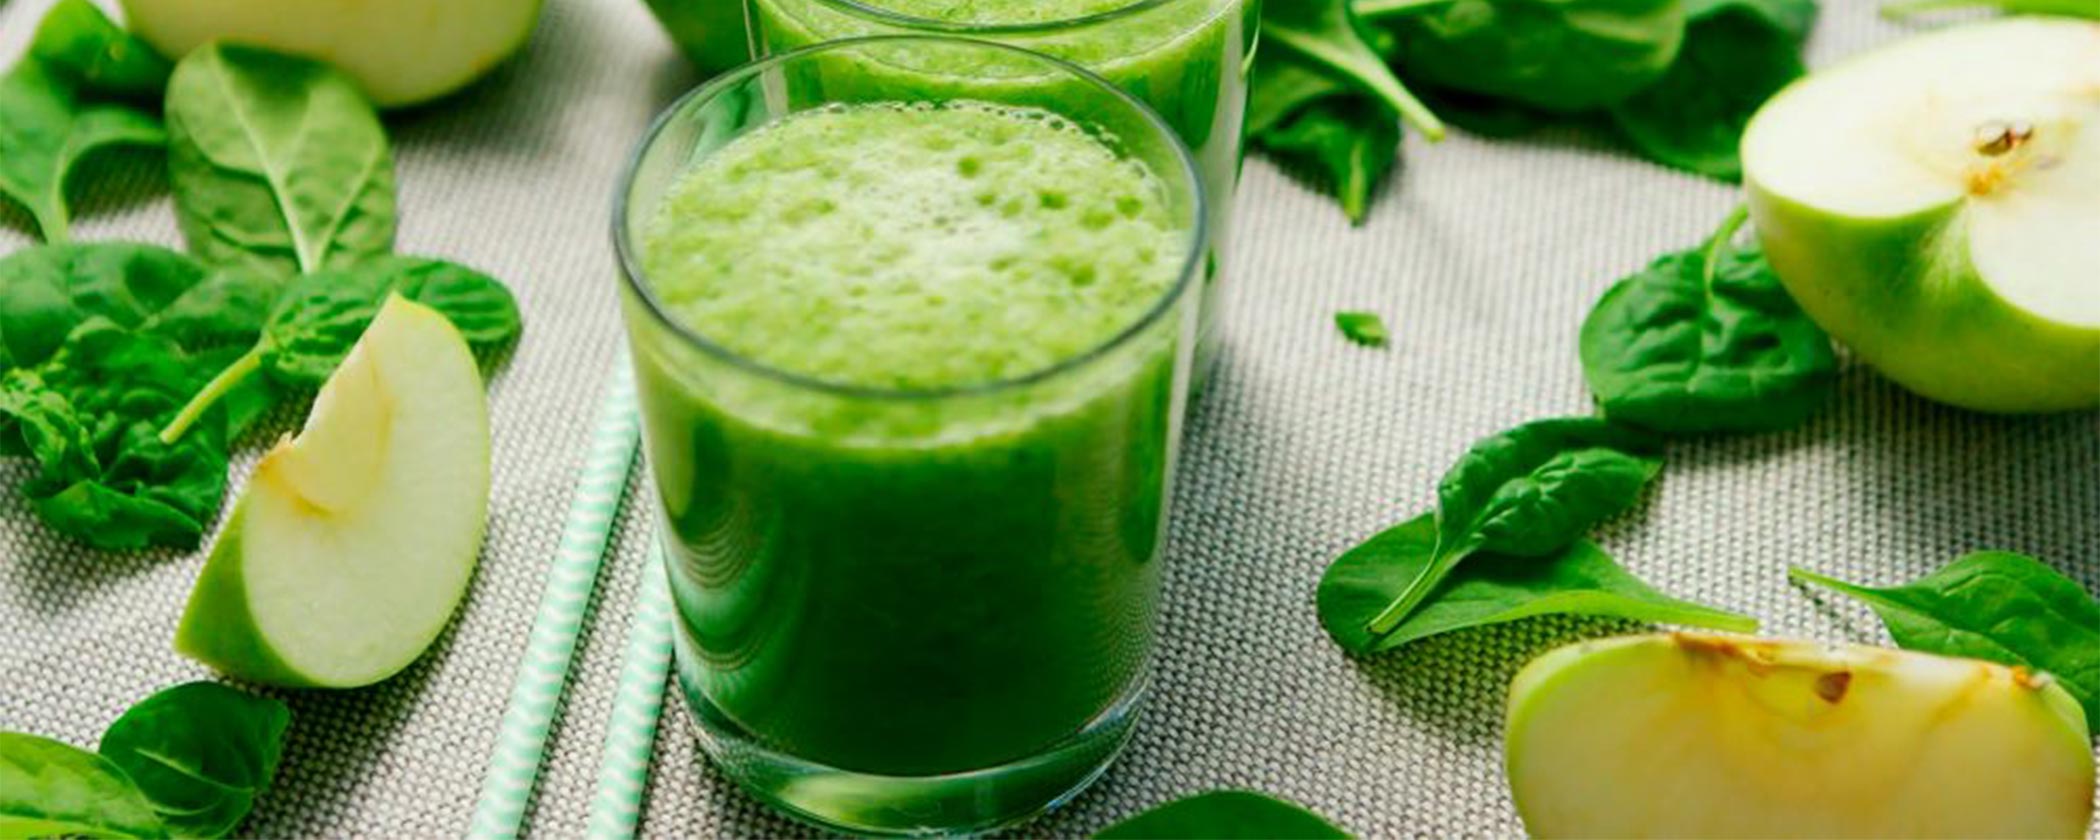 Green smoothie in clear glasses with spinach leaves and green apples on table